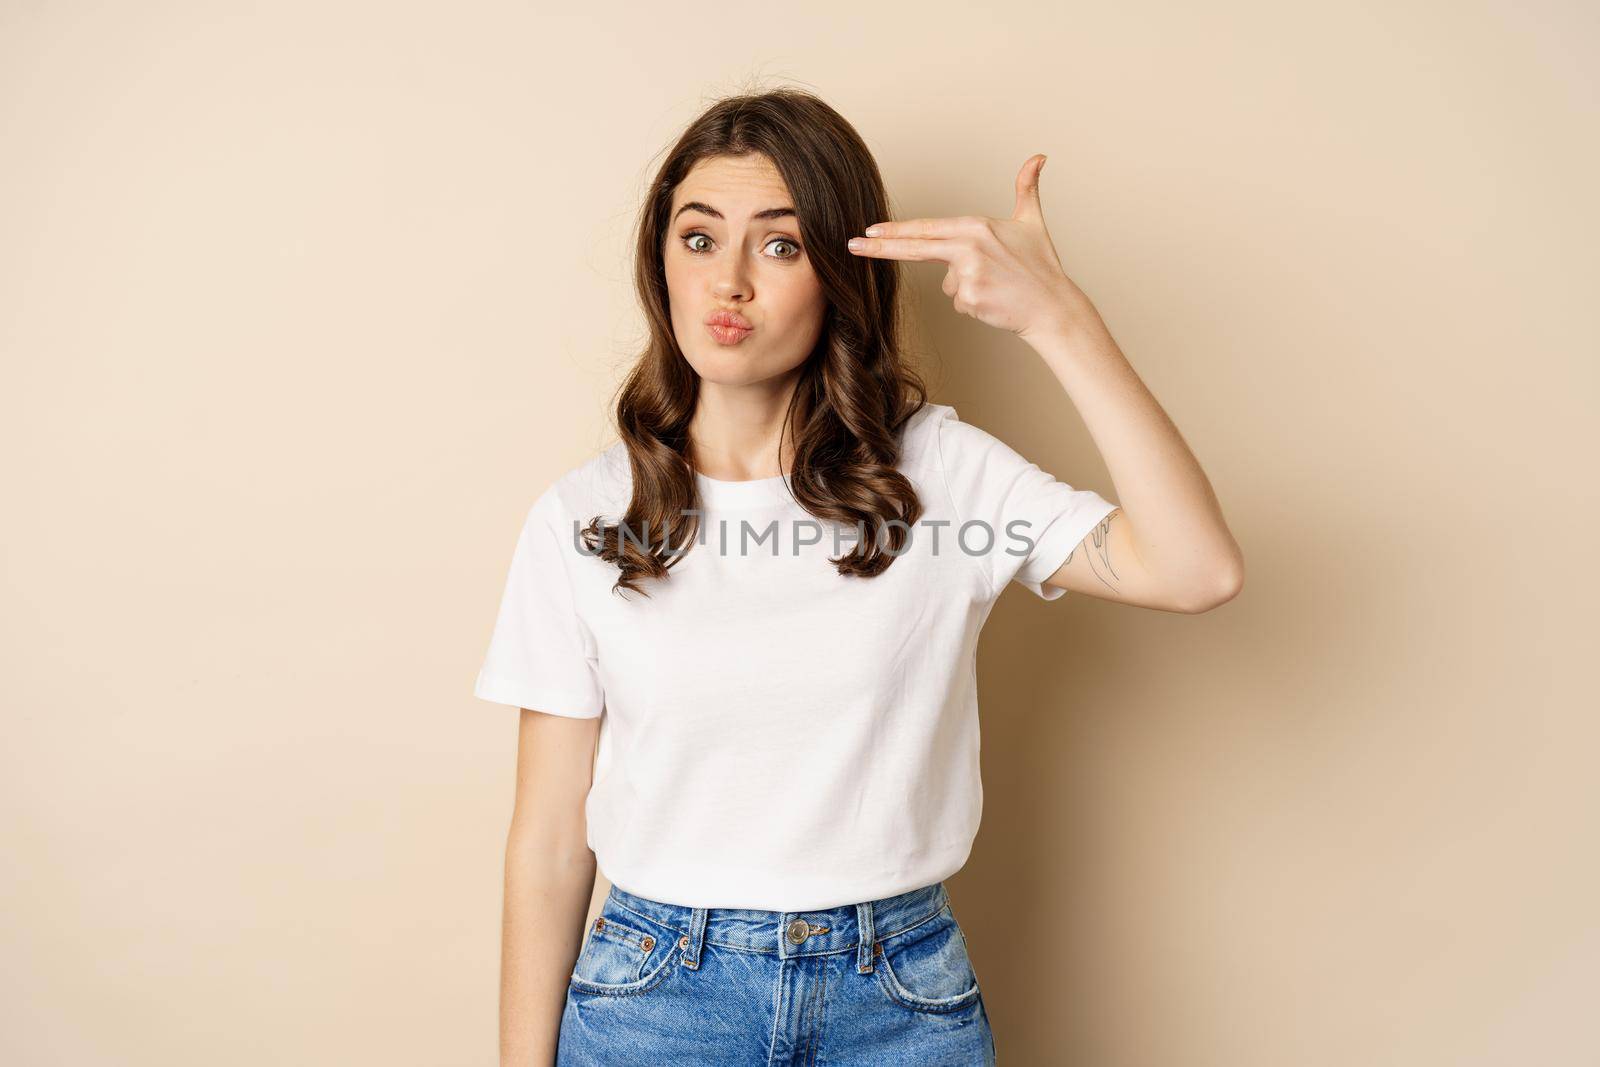 Young woman showing finger pistol sign near head and looking annoyed, sick and tired, standing over beige background.